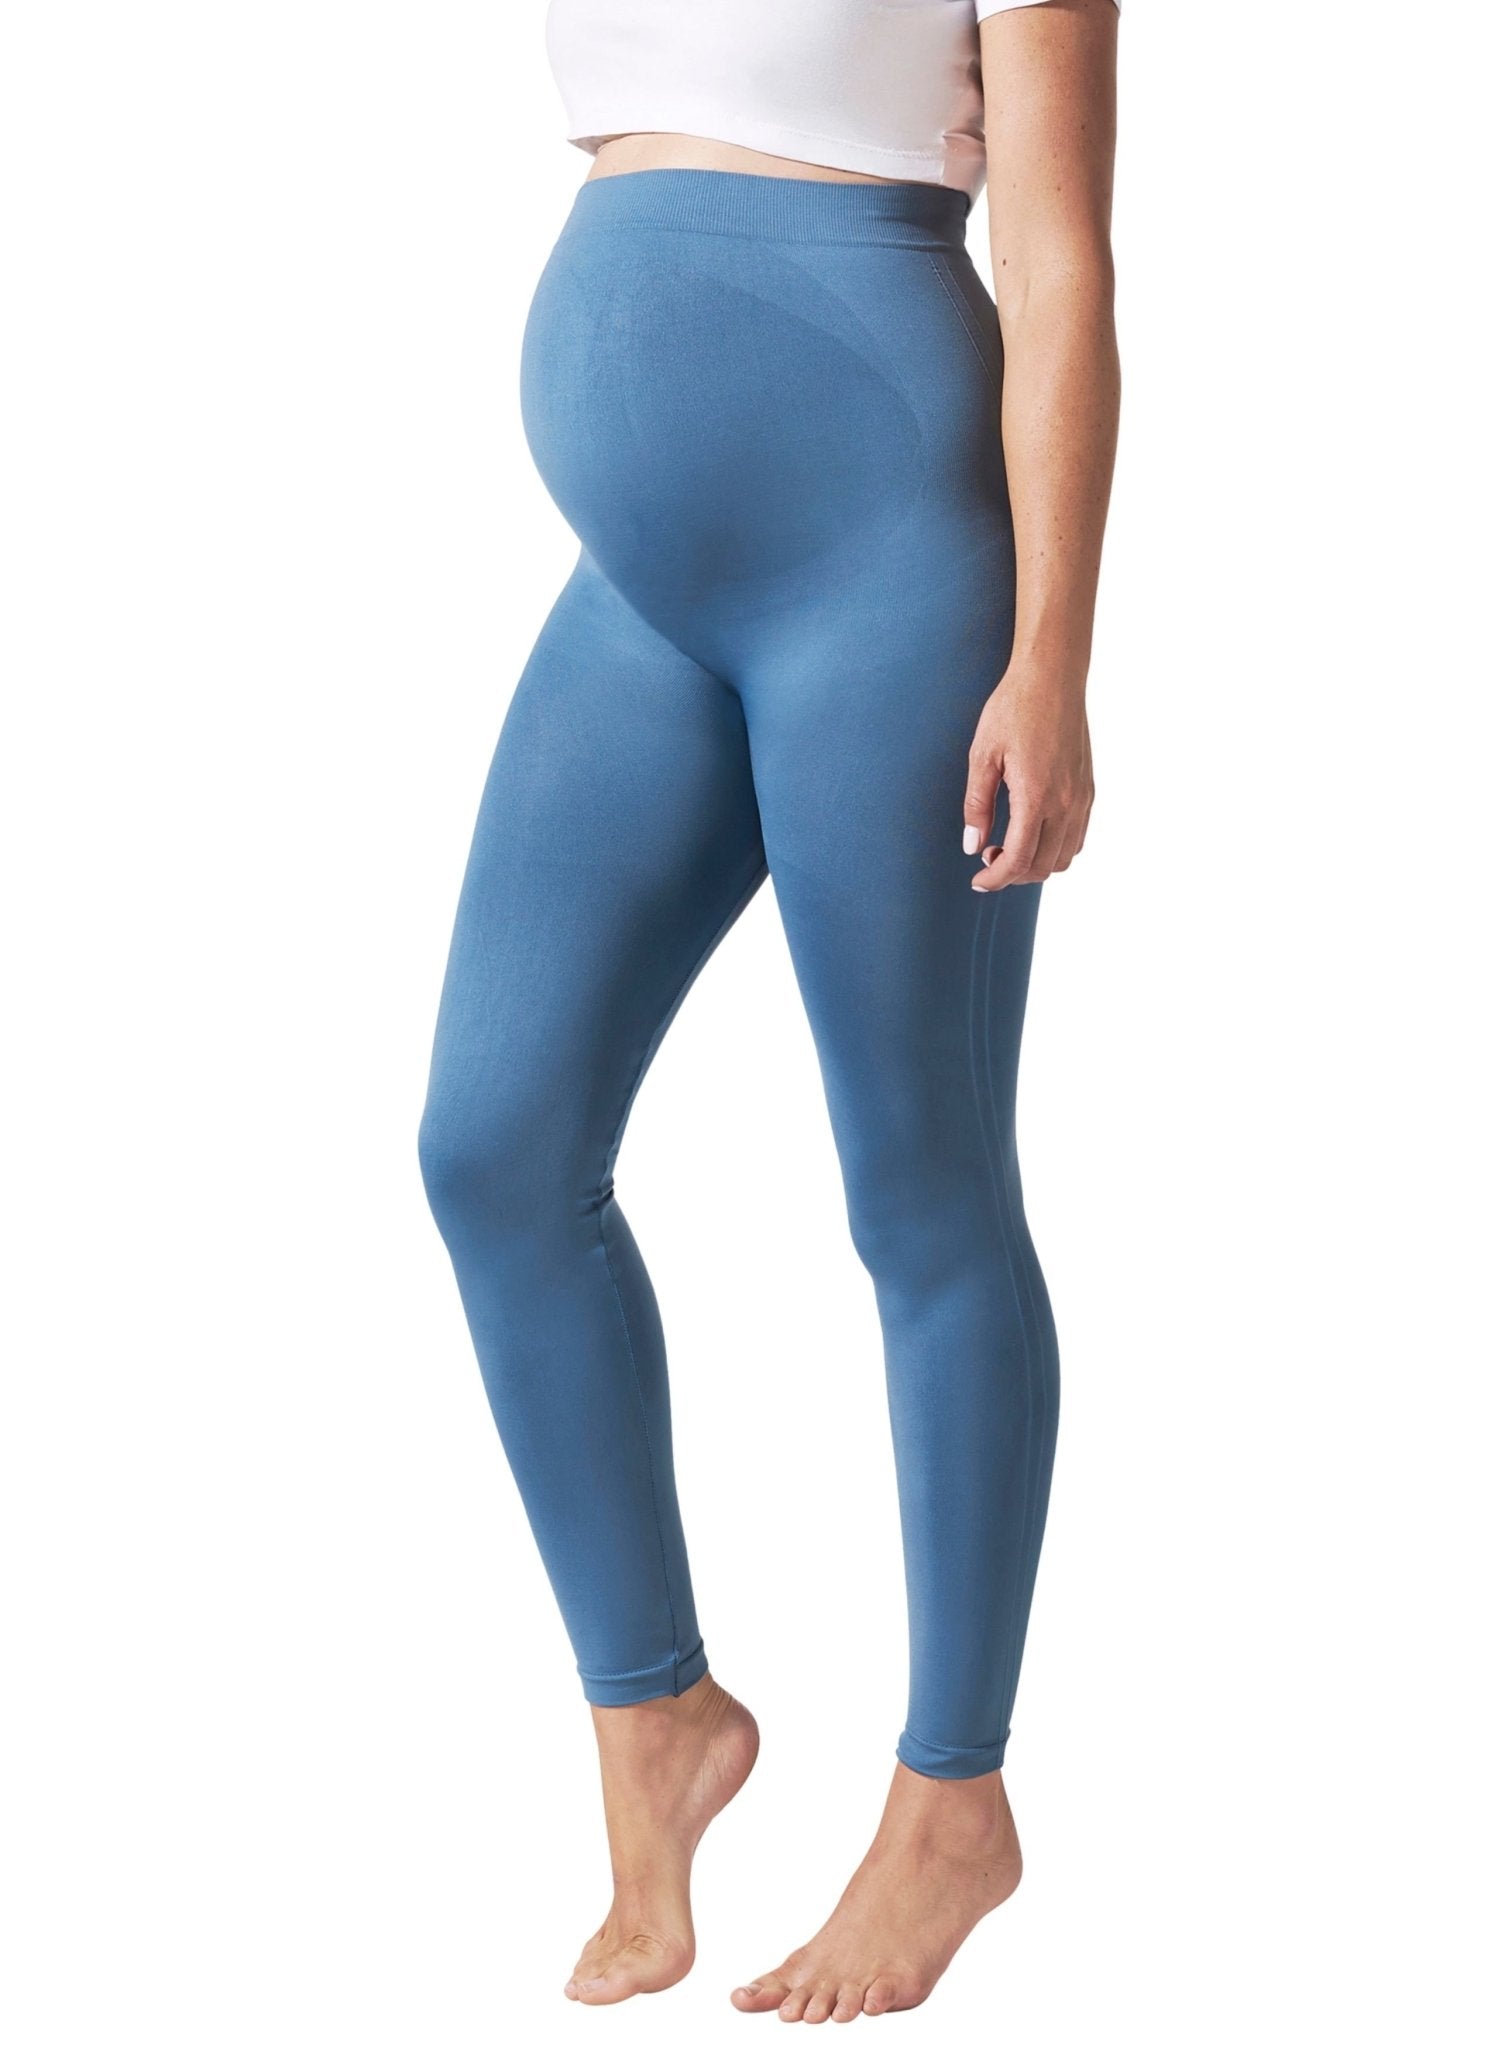 BLANQI Maternity Belly Support Leggings - Oil Blue - Mums and Bumps